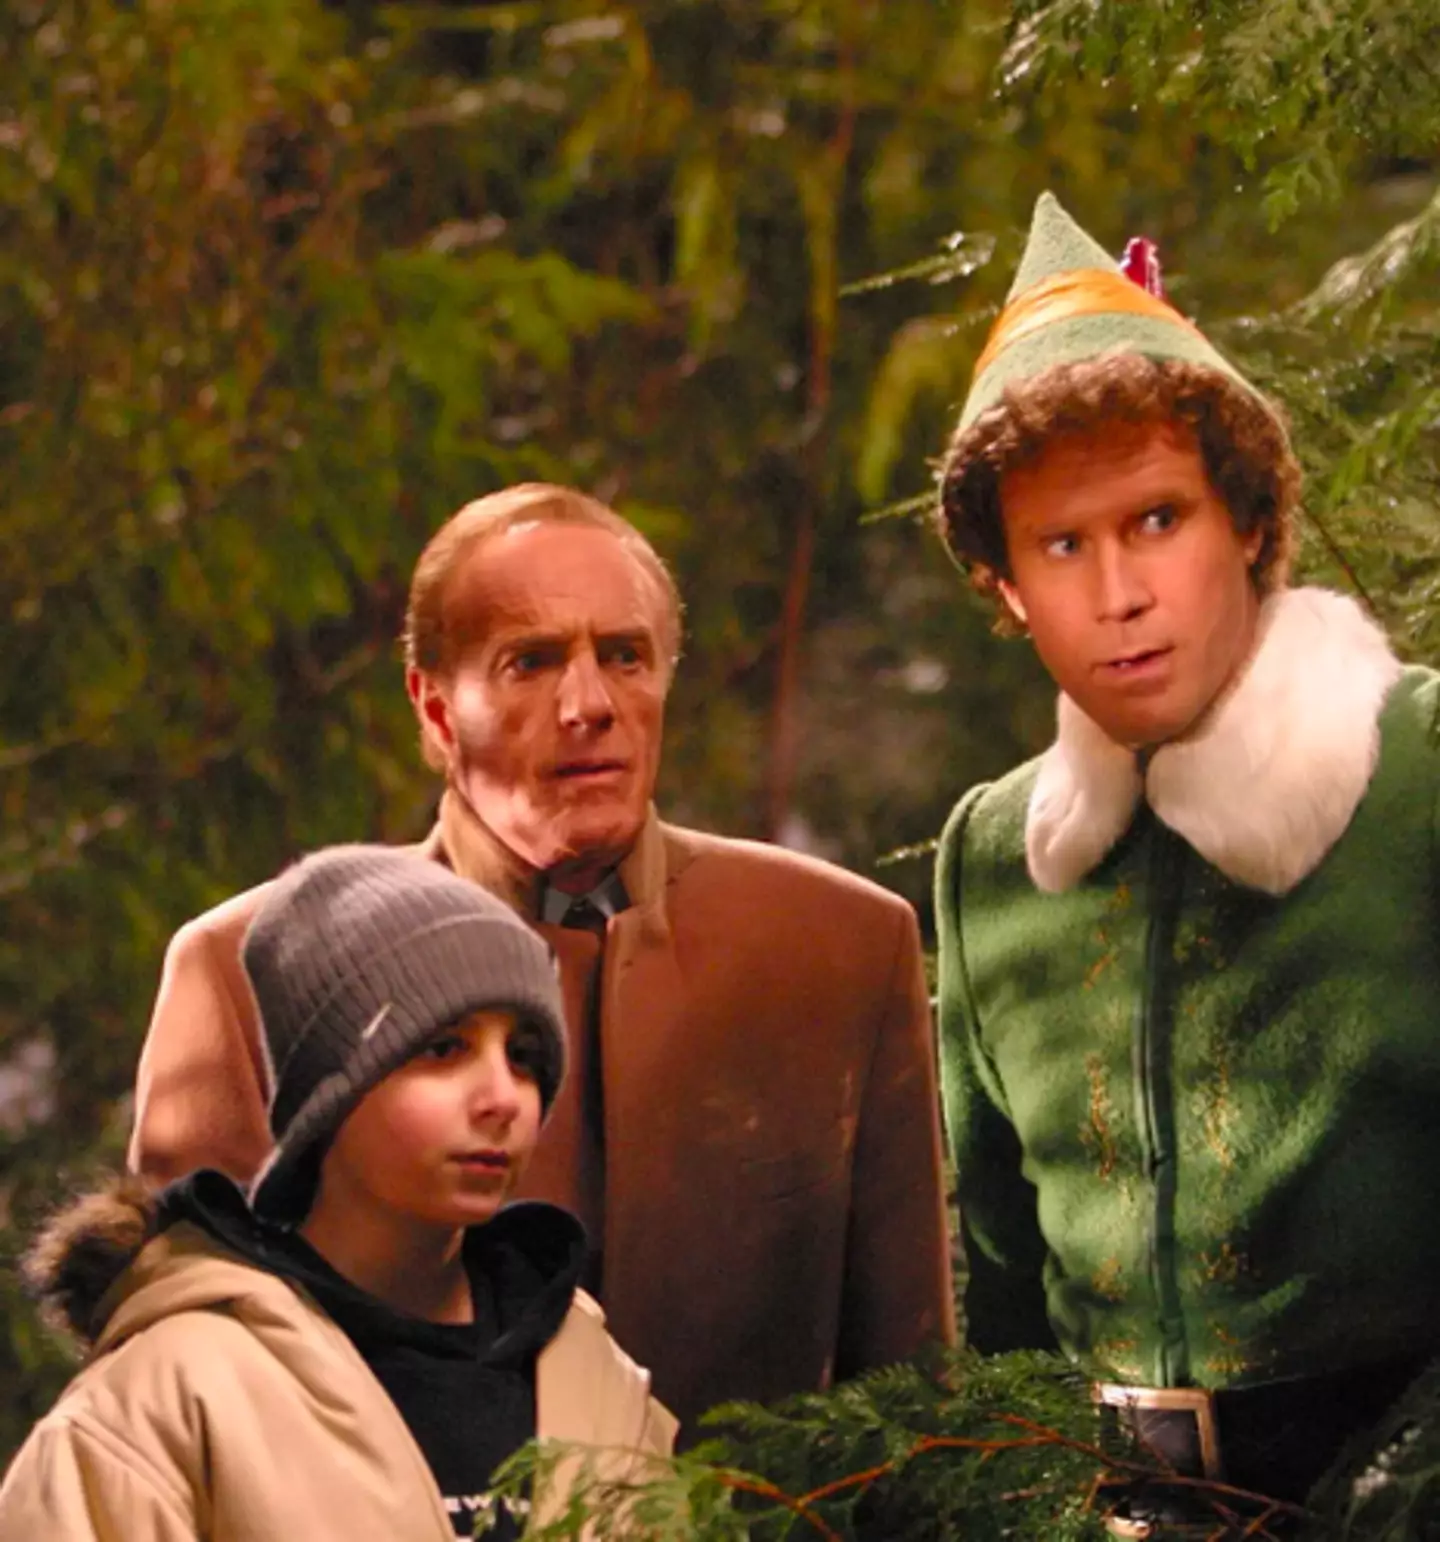 If you don't have Elf on at Christmas time you're quite simply a cotton-headed ninny-muggins.